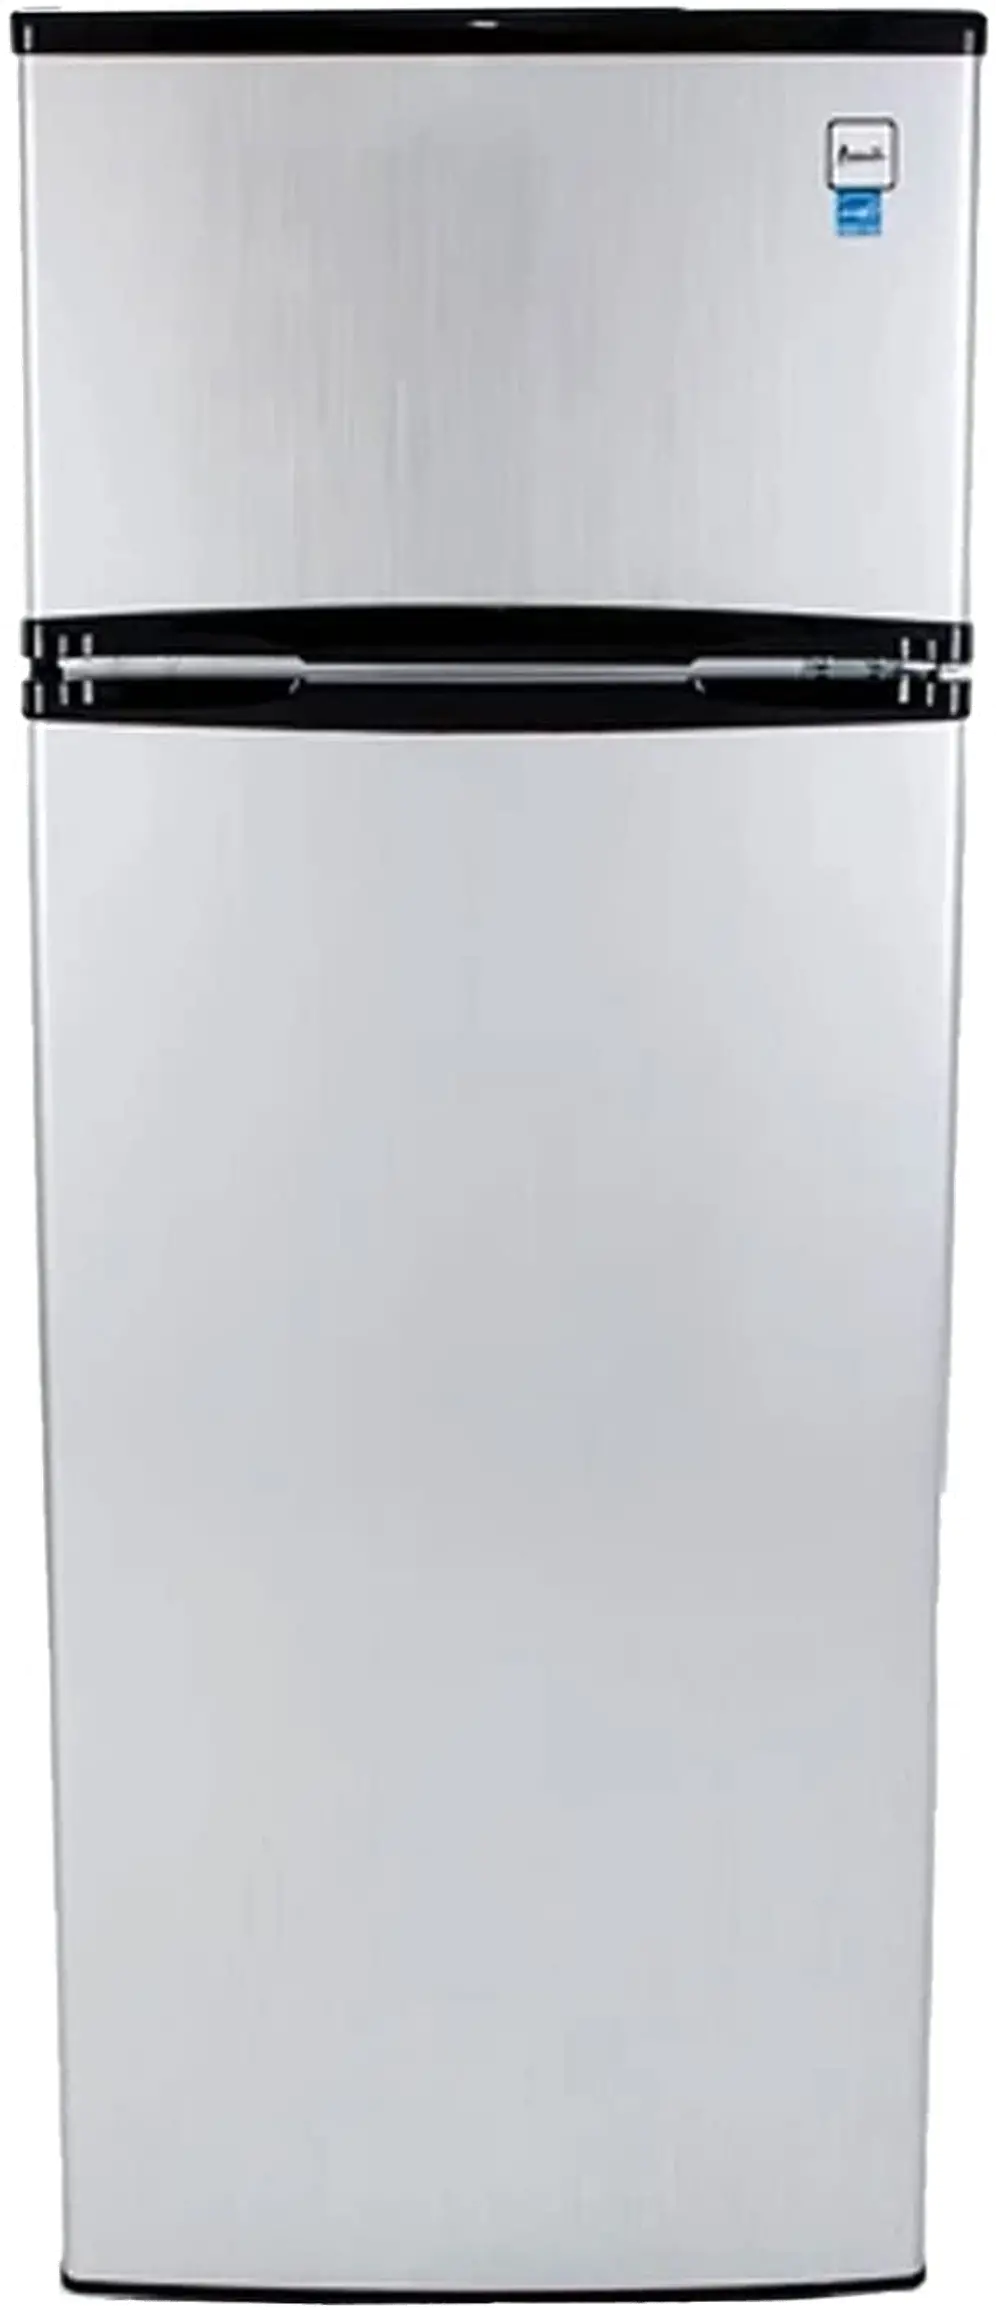 RA7316PST Avanti 7.4 cu ft Compact Refrigerator with Freezer - Stainless Steel-1